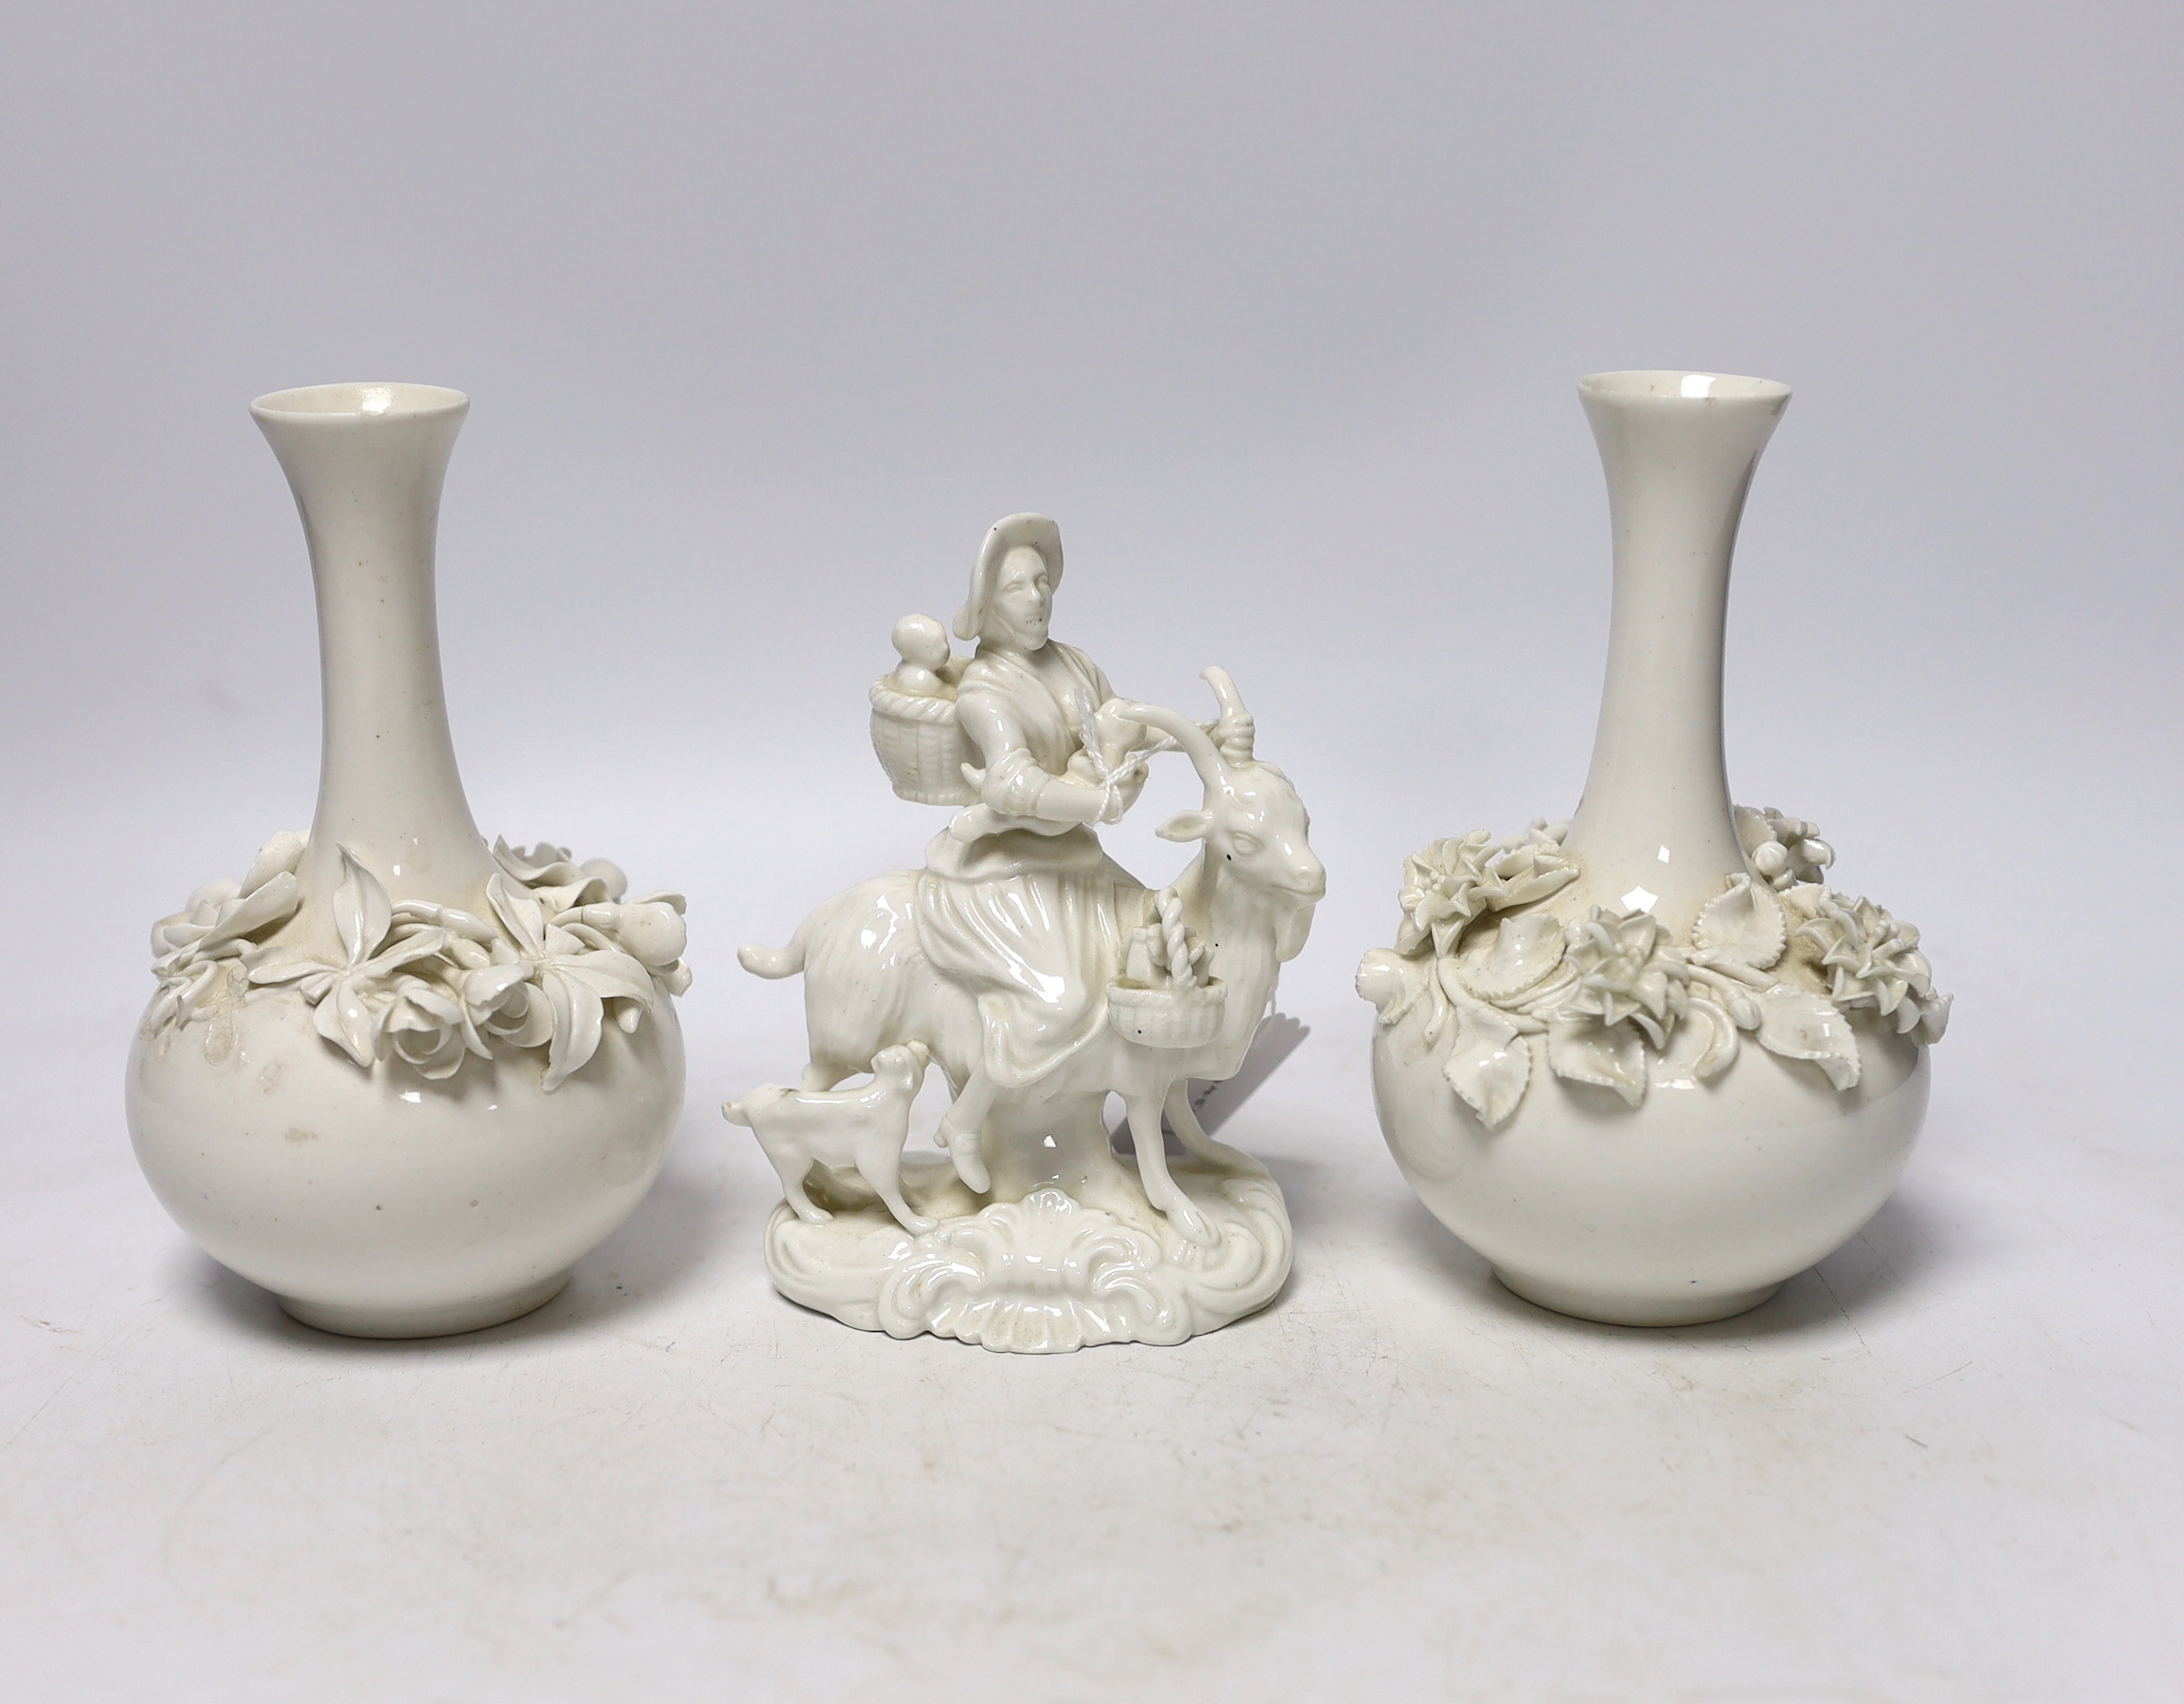 Sampson Hancock, Derby, a pair of floral encrusted vases and figure group, largest 15.5cm high